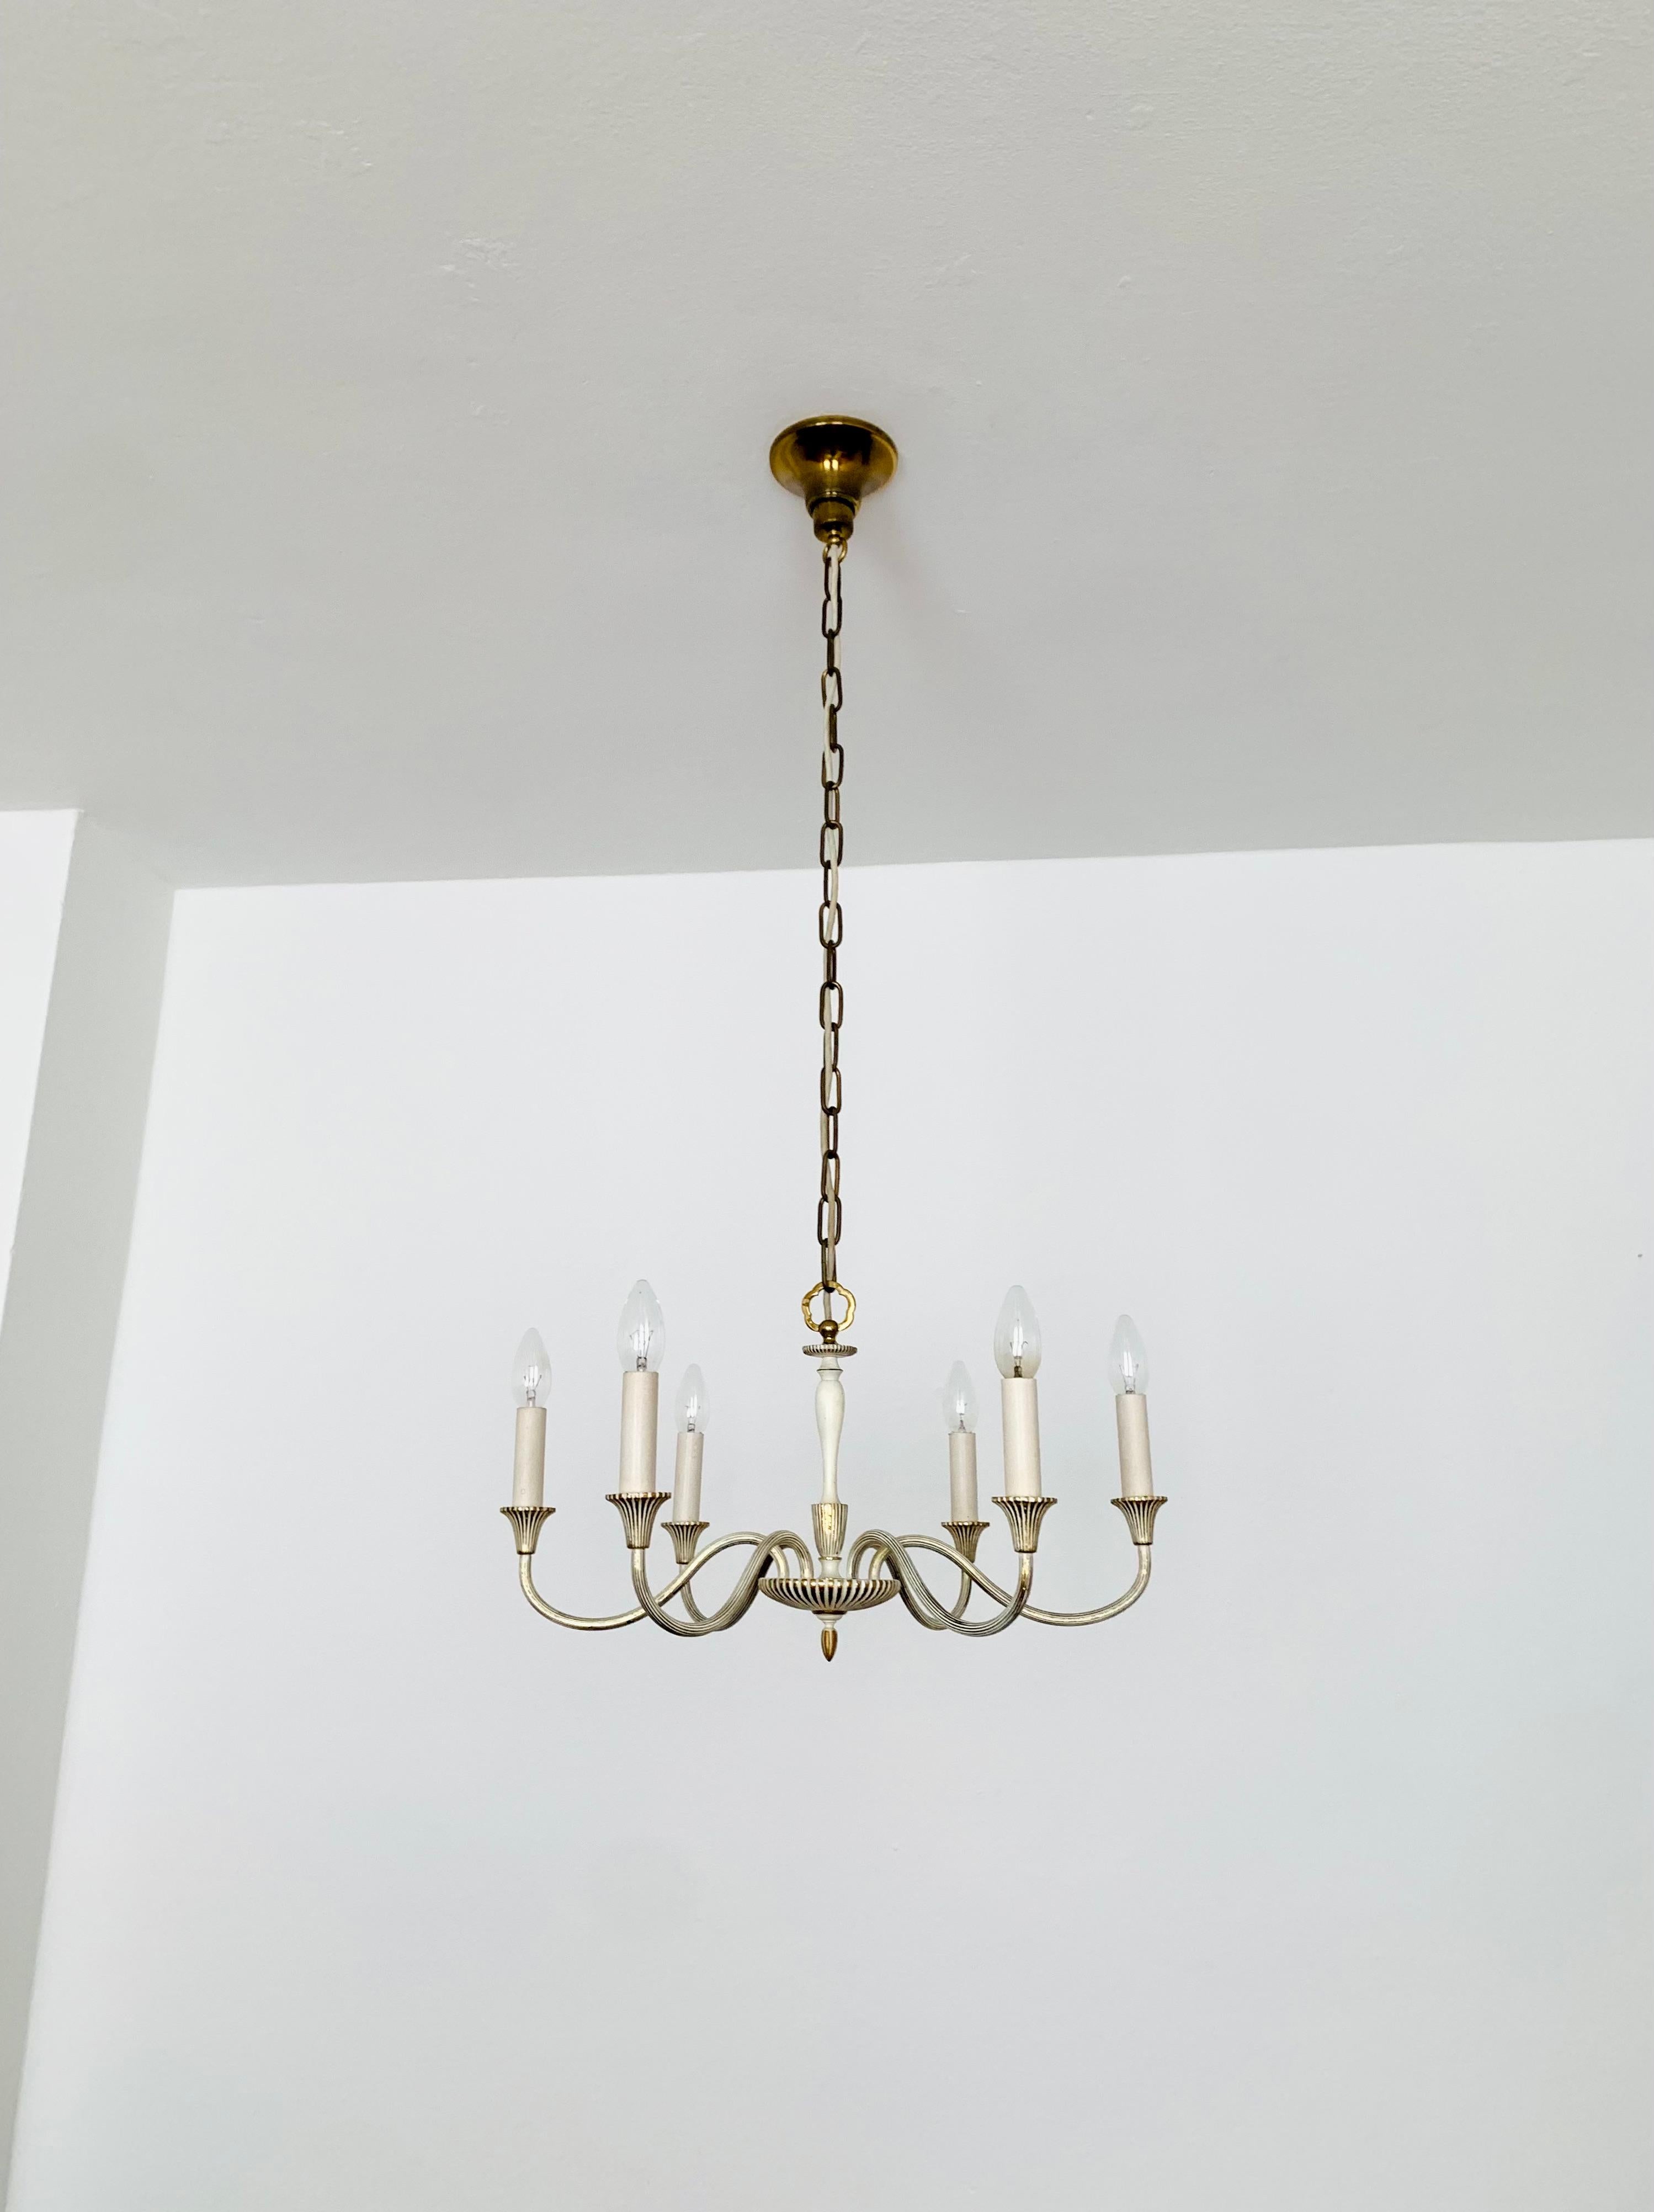 Very high quality chandelier from the 1950s.
Exceptional design with great attention to detail.
A very comfortable light is created.

Manufacturer:  Vereinigte Werkstätten München

The lampshades are not part of the offer.
They serve as examples